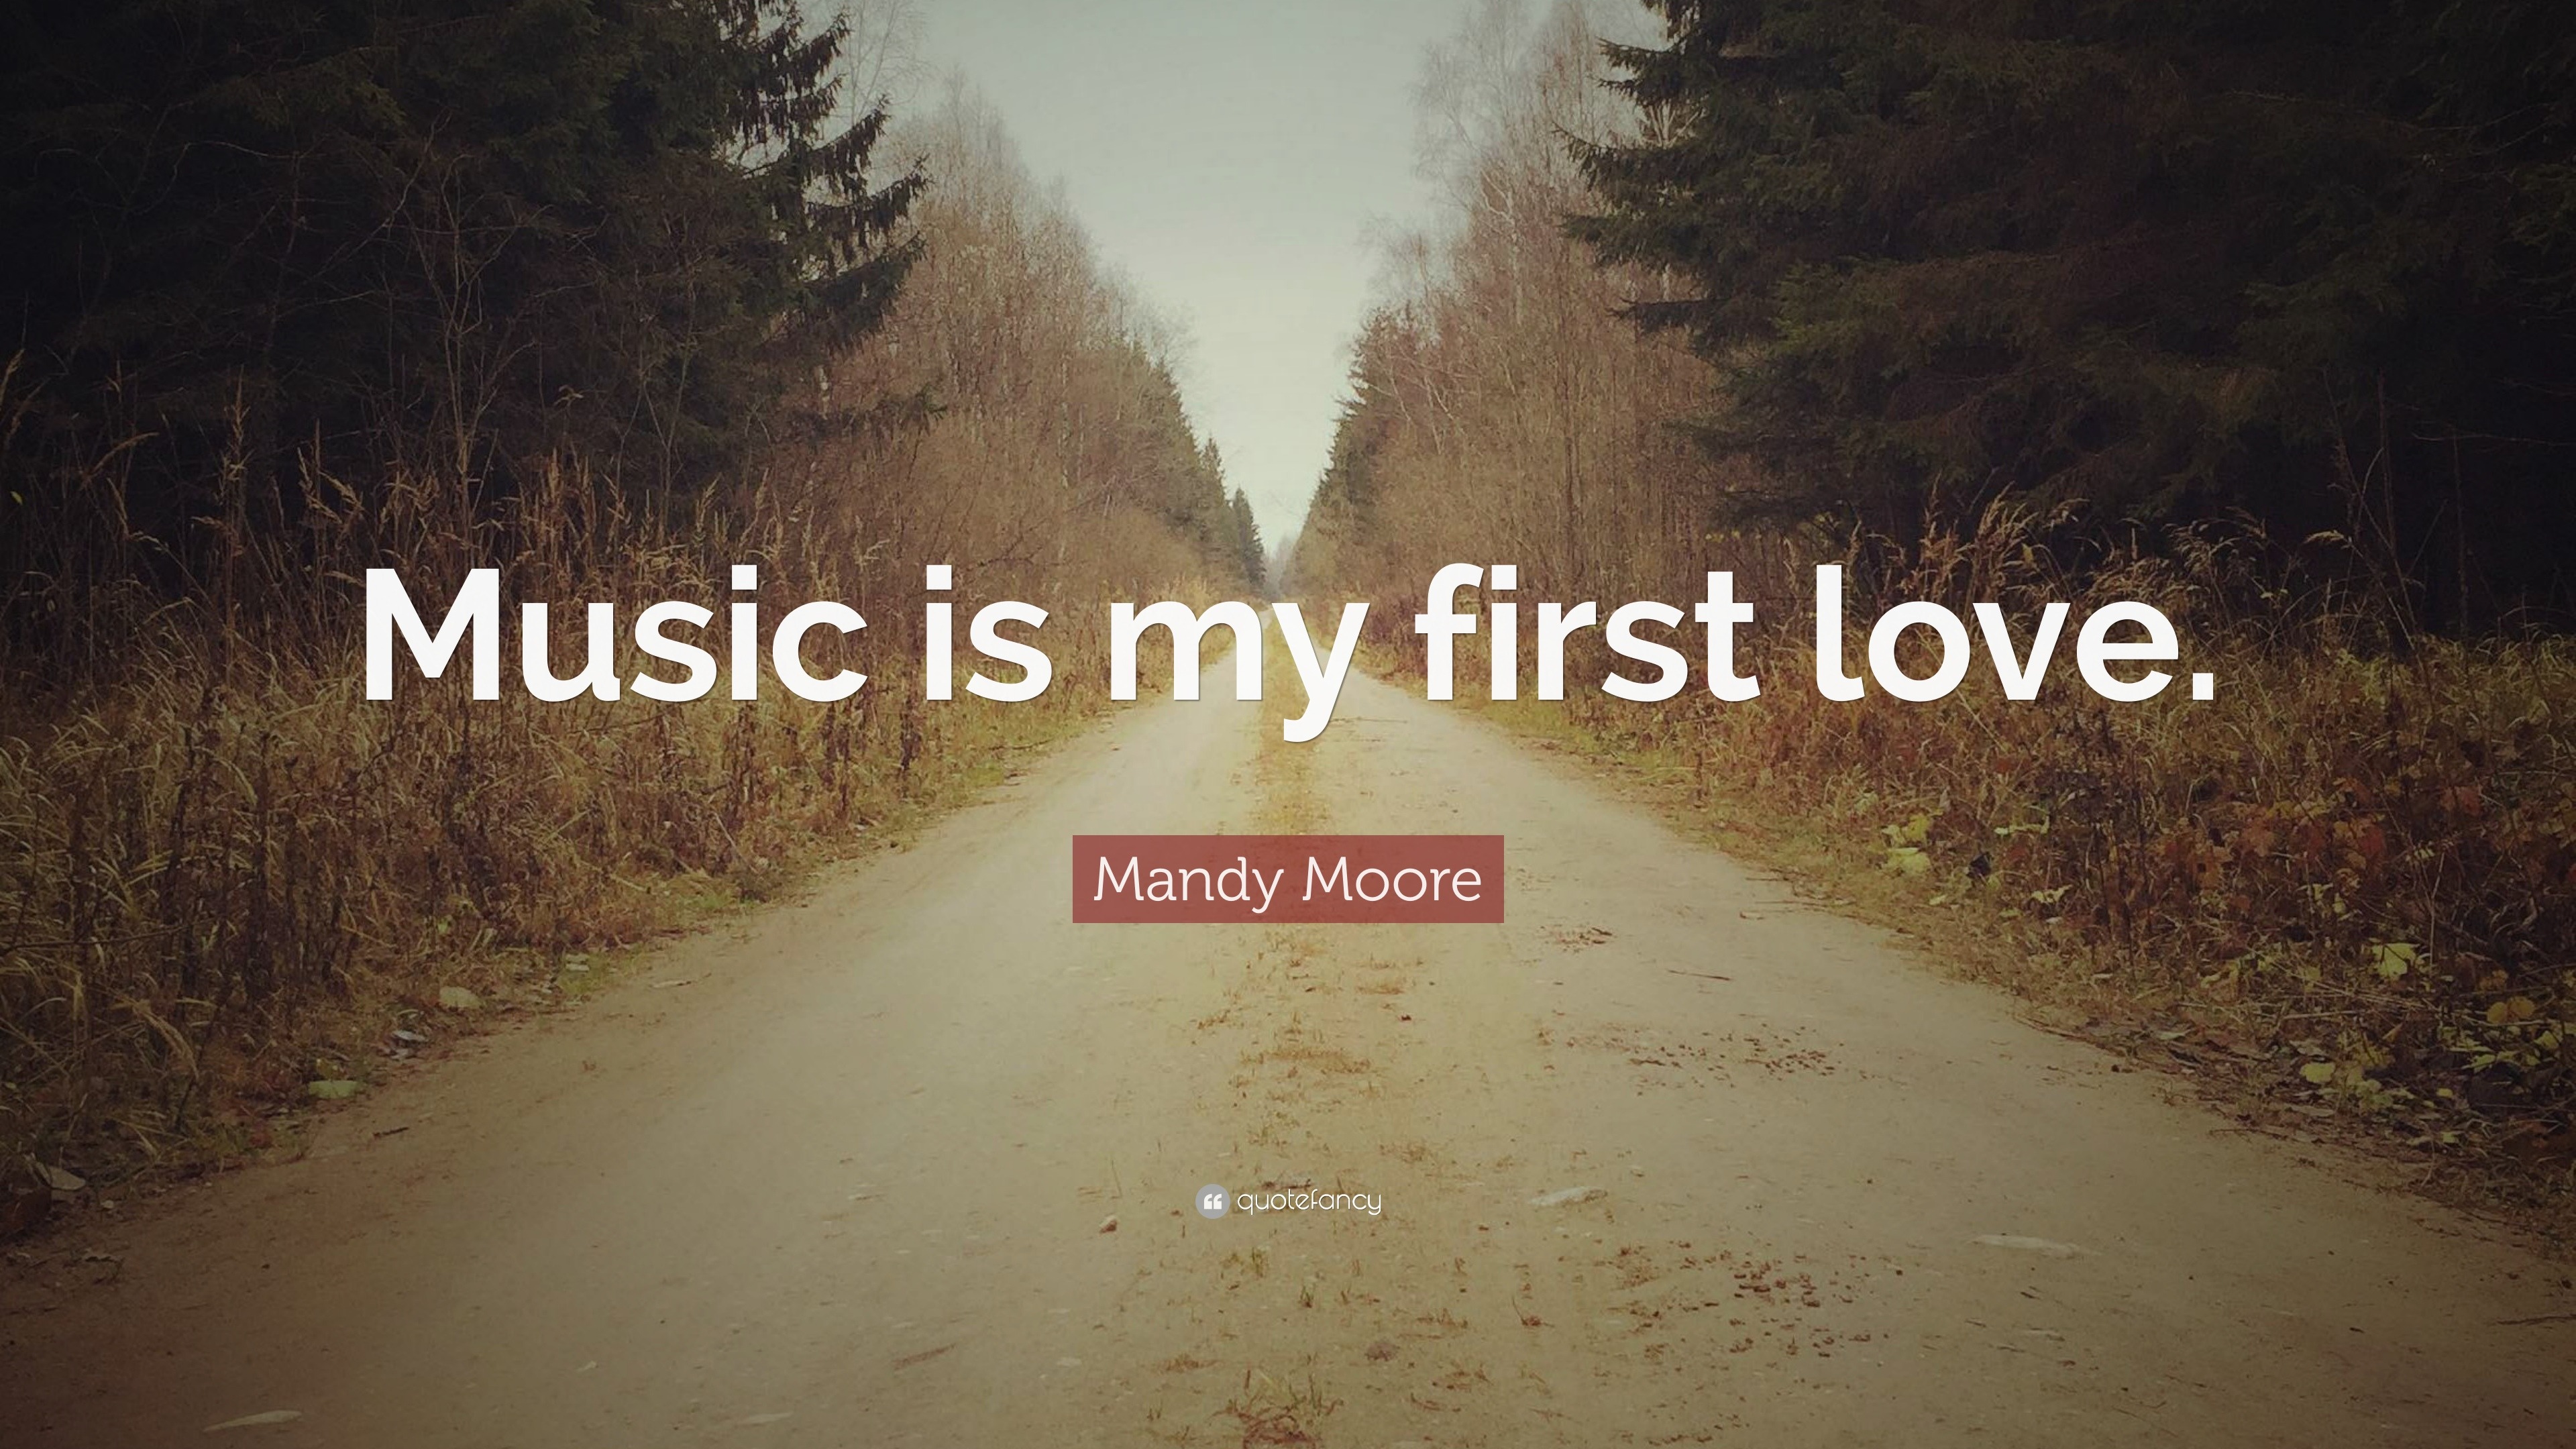 Mandy Moore Quote “Music is my first love ”